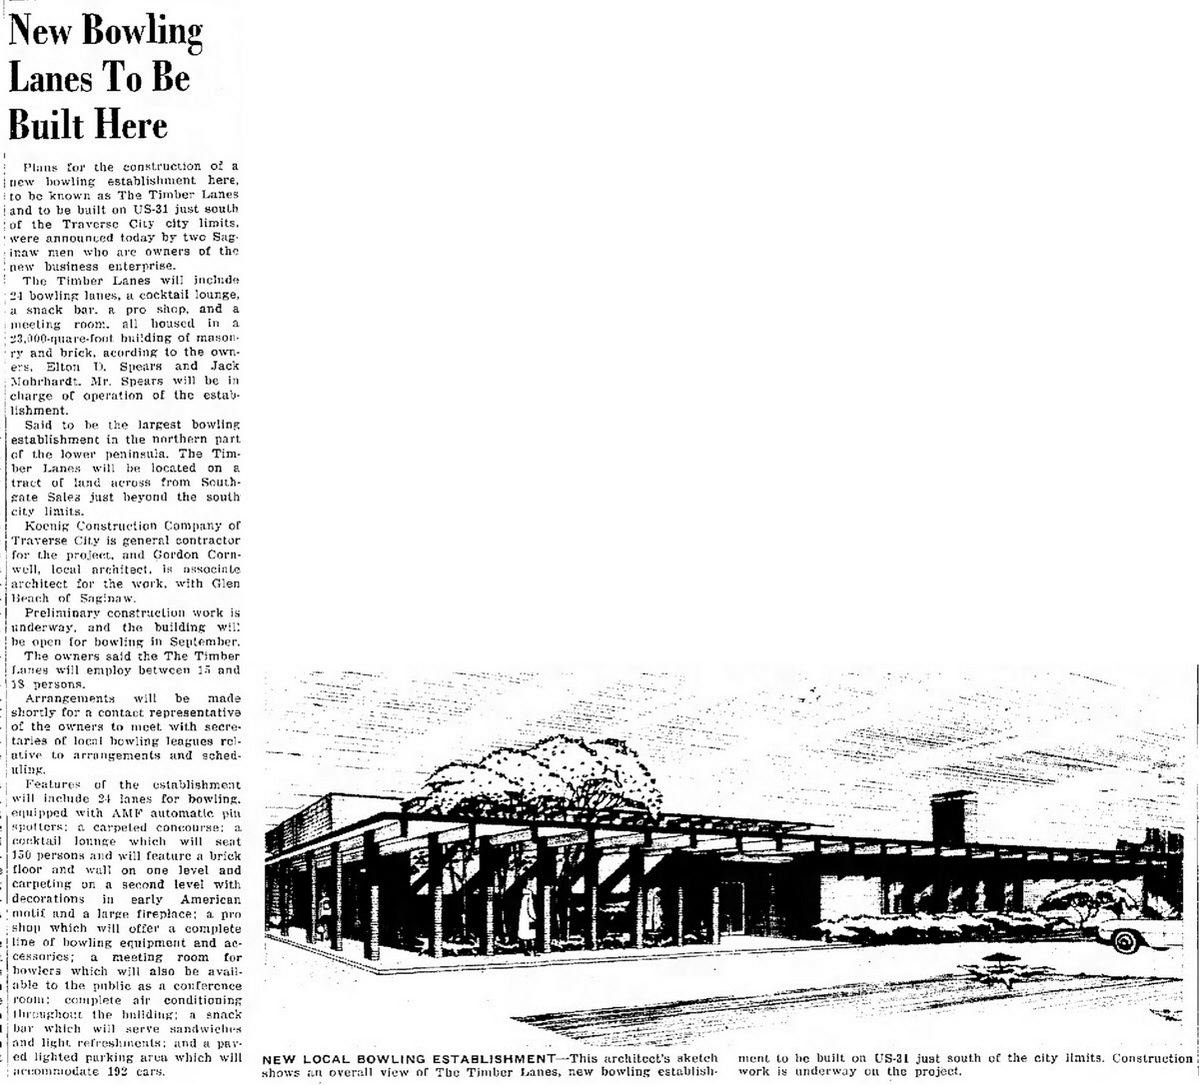 Timber Lanes - May 1961 Article On New Alley